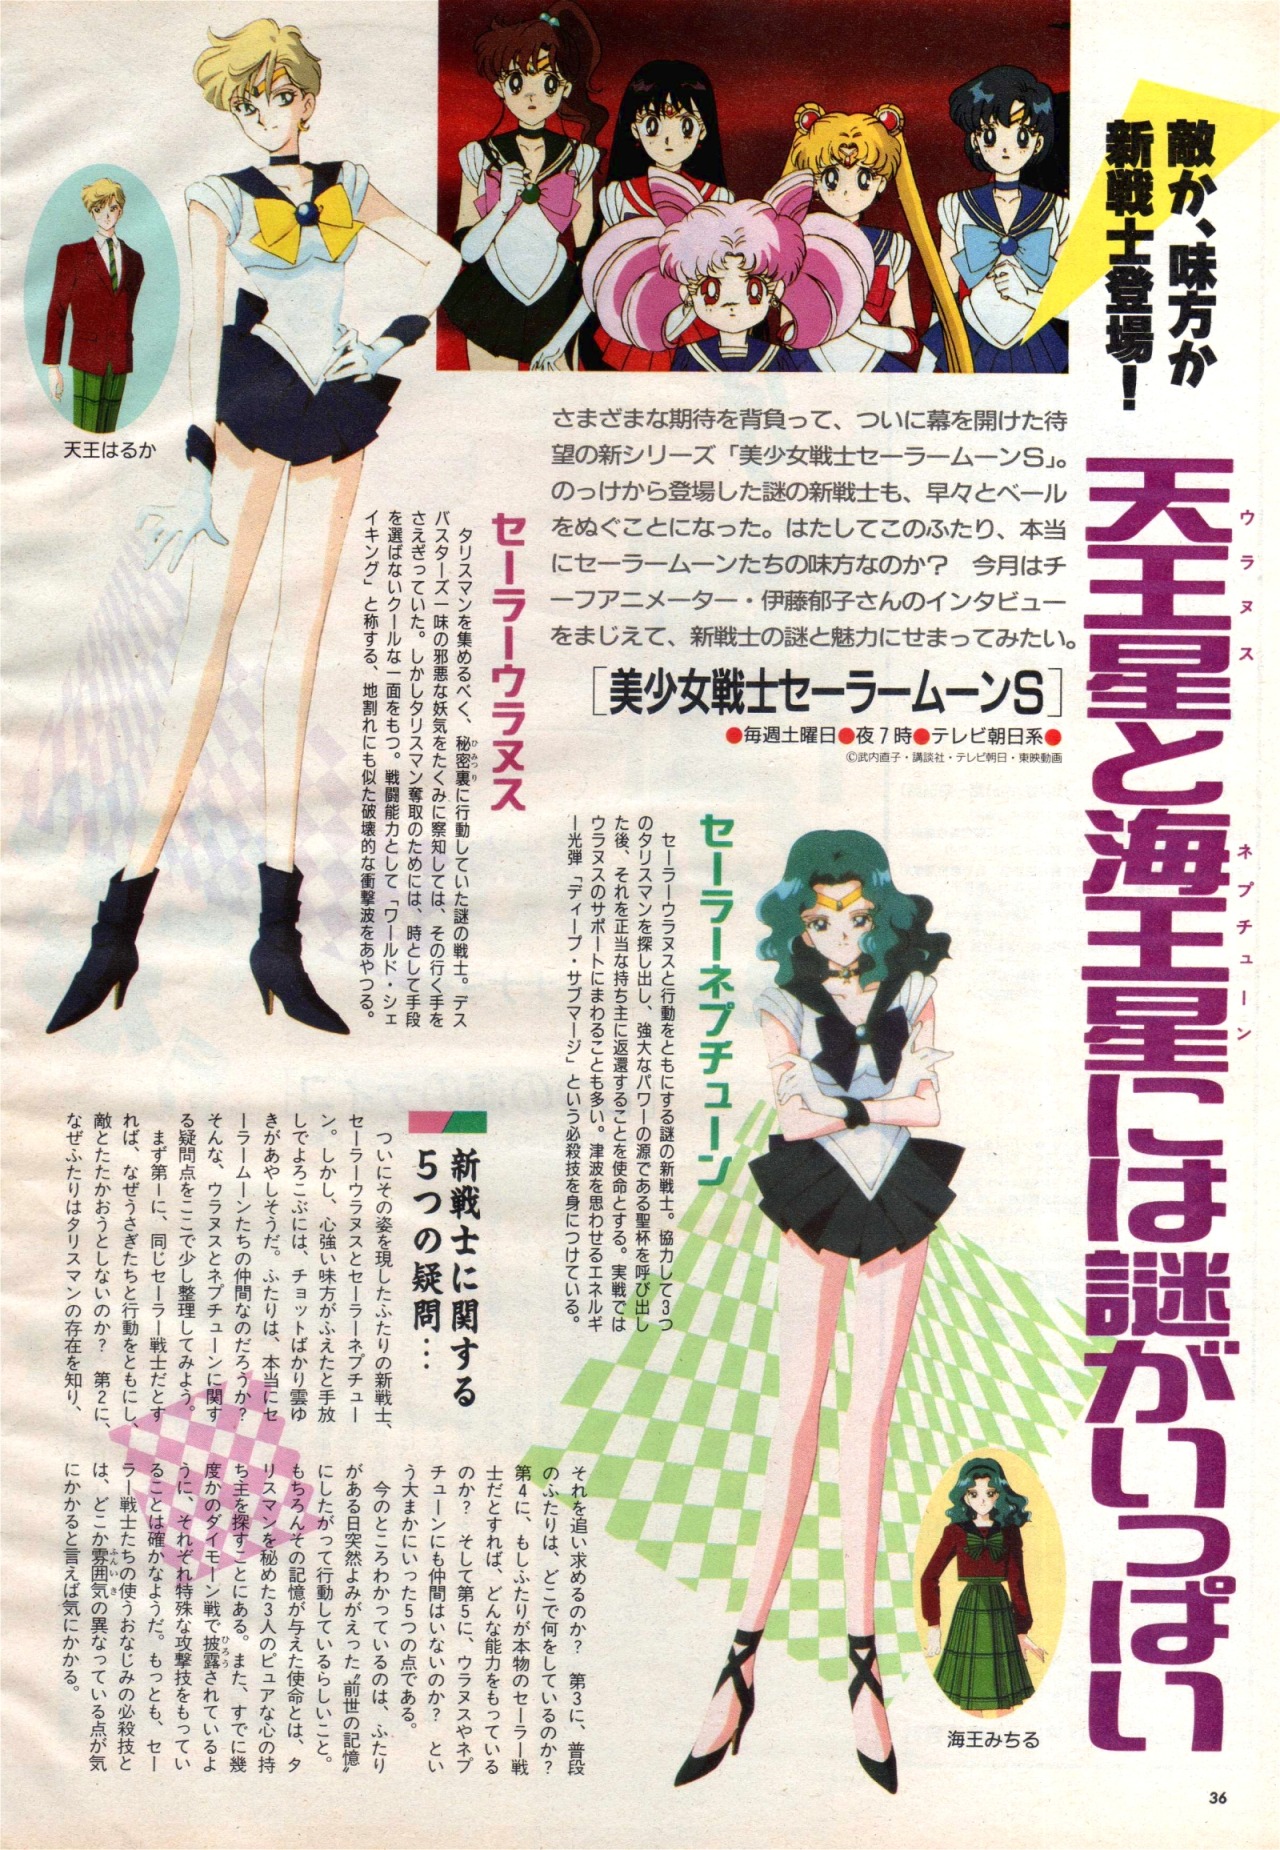 Anim Archive Sailor Moon S Interview With Ikuko Itoh